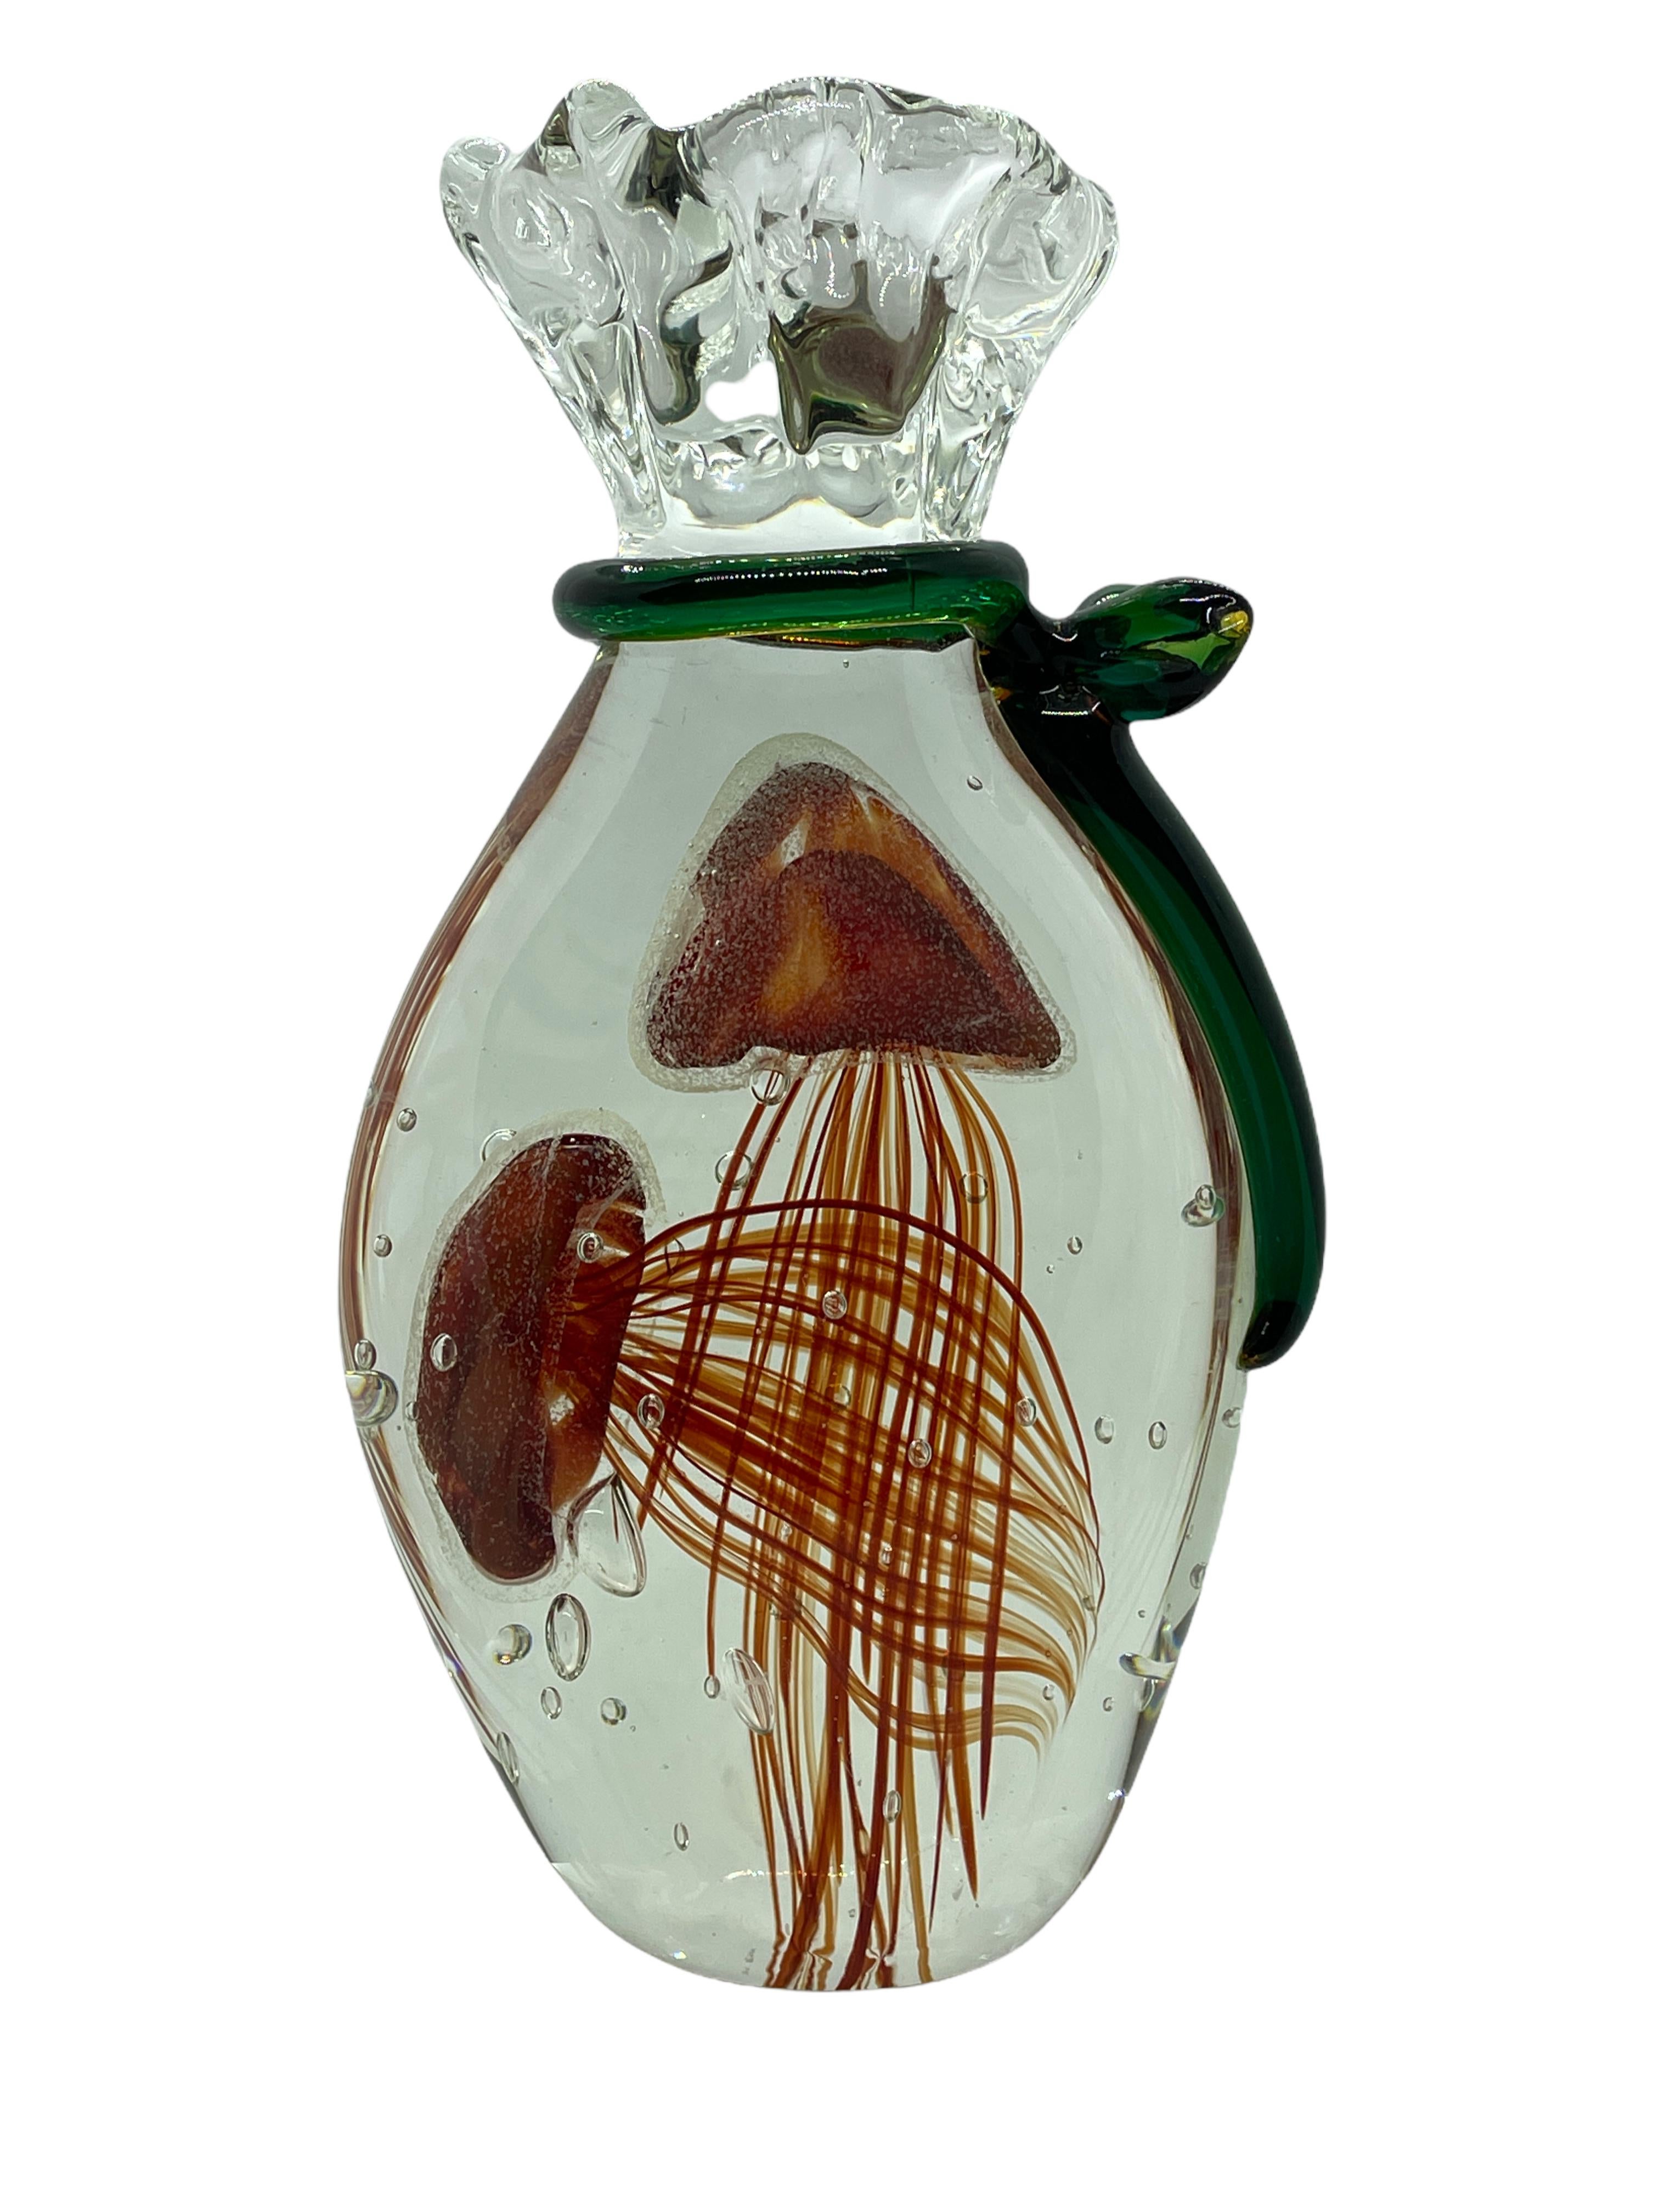 Beautiful stunning Murano hand blown aquarium design Italian art glass sculpture. Showing two Jellyfish inside, in red and orange color, floating on controlled bubbles. A beautiful nice addition at your table, credenza or side board. Marked with